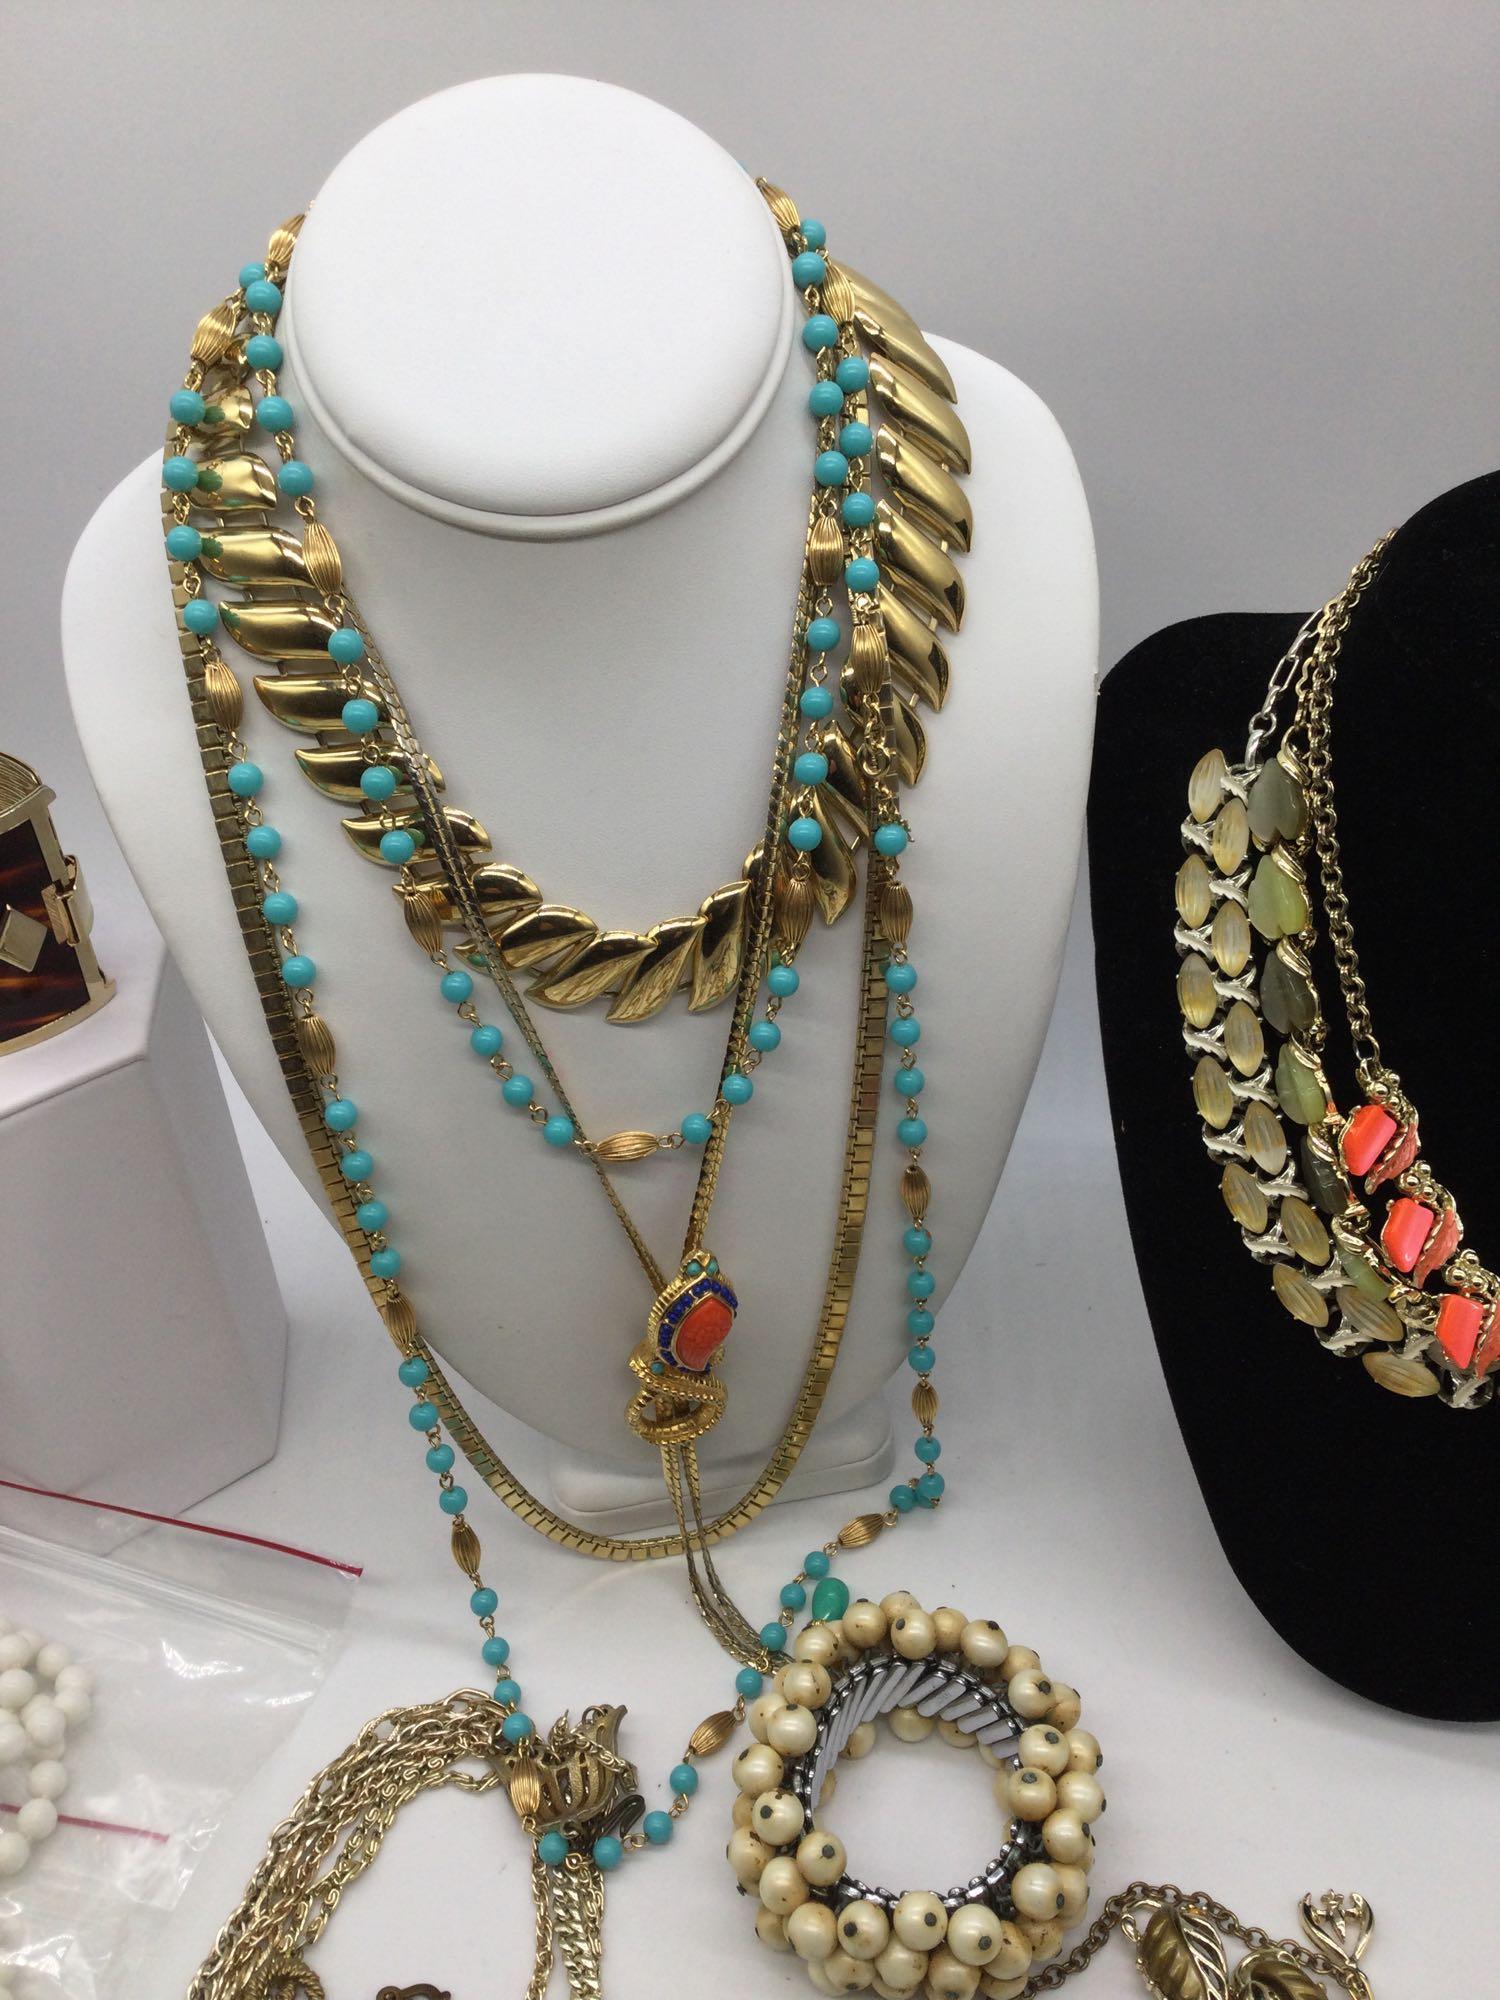 Large selection of vintage fashion jewelry necklaces, bracelets, earrings etc?